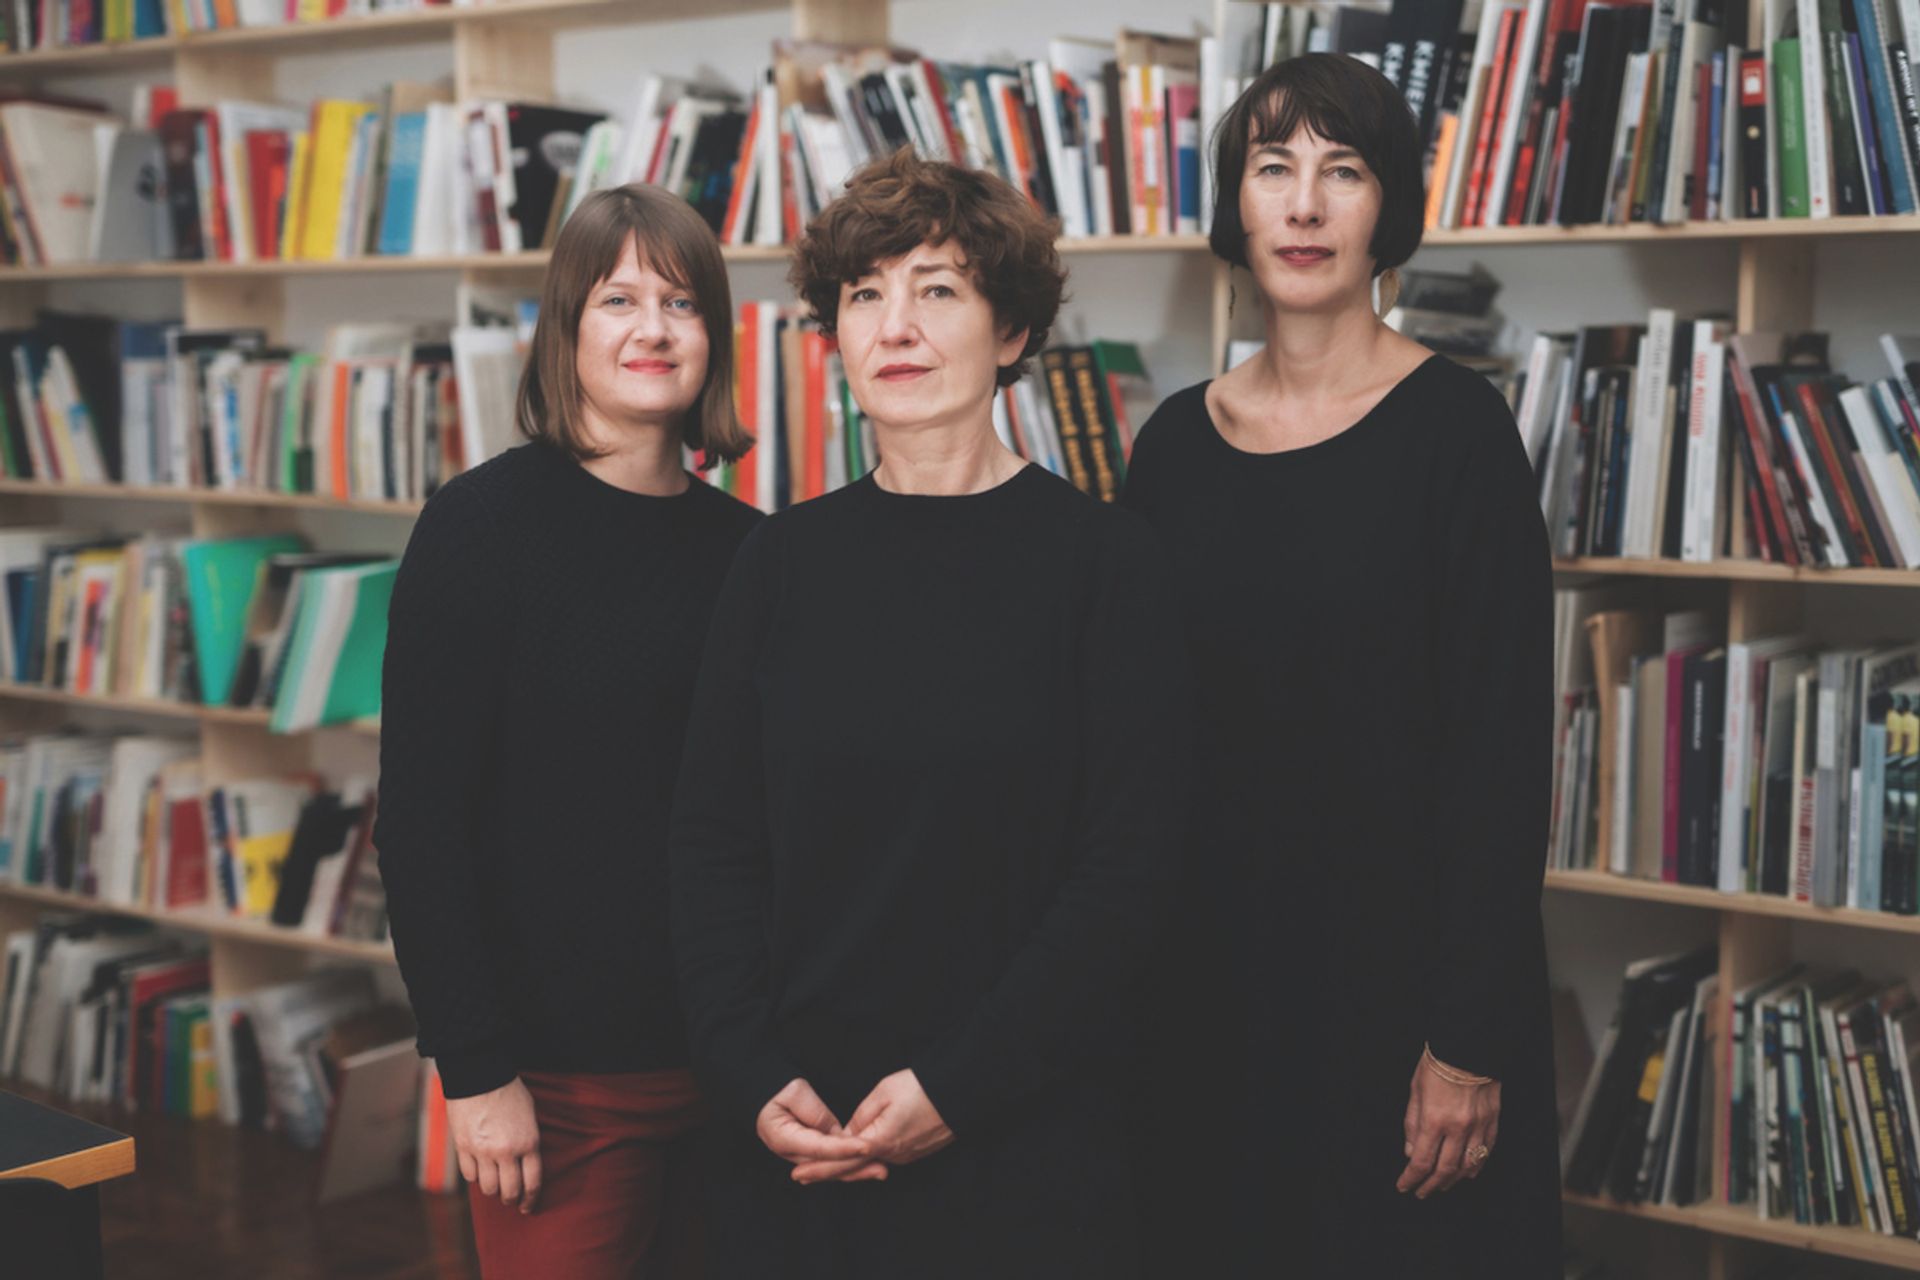 What, How & for Whom (WHW) members Sabina Sabolovic, Natasa Ilic and Ivet Curlin take equal share in running the Kunsthalle Wien Courtesy of WHW